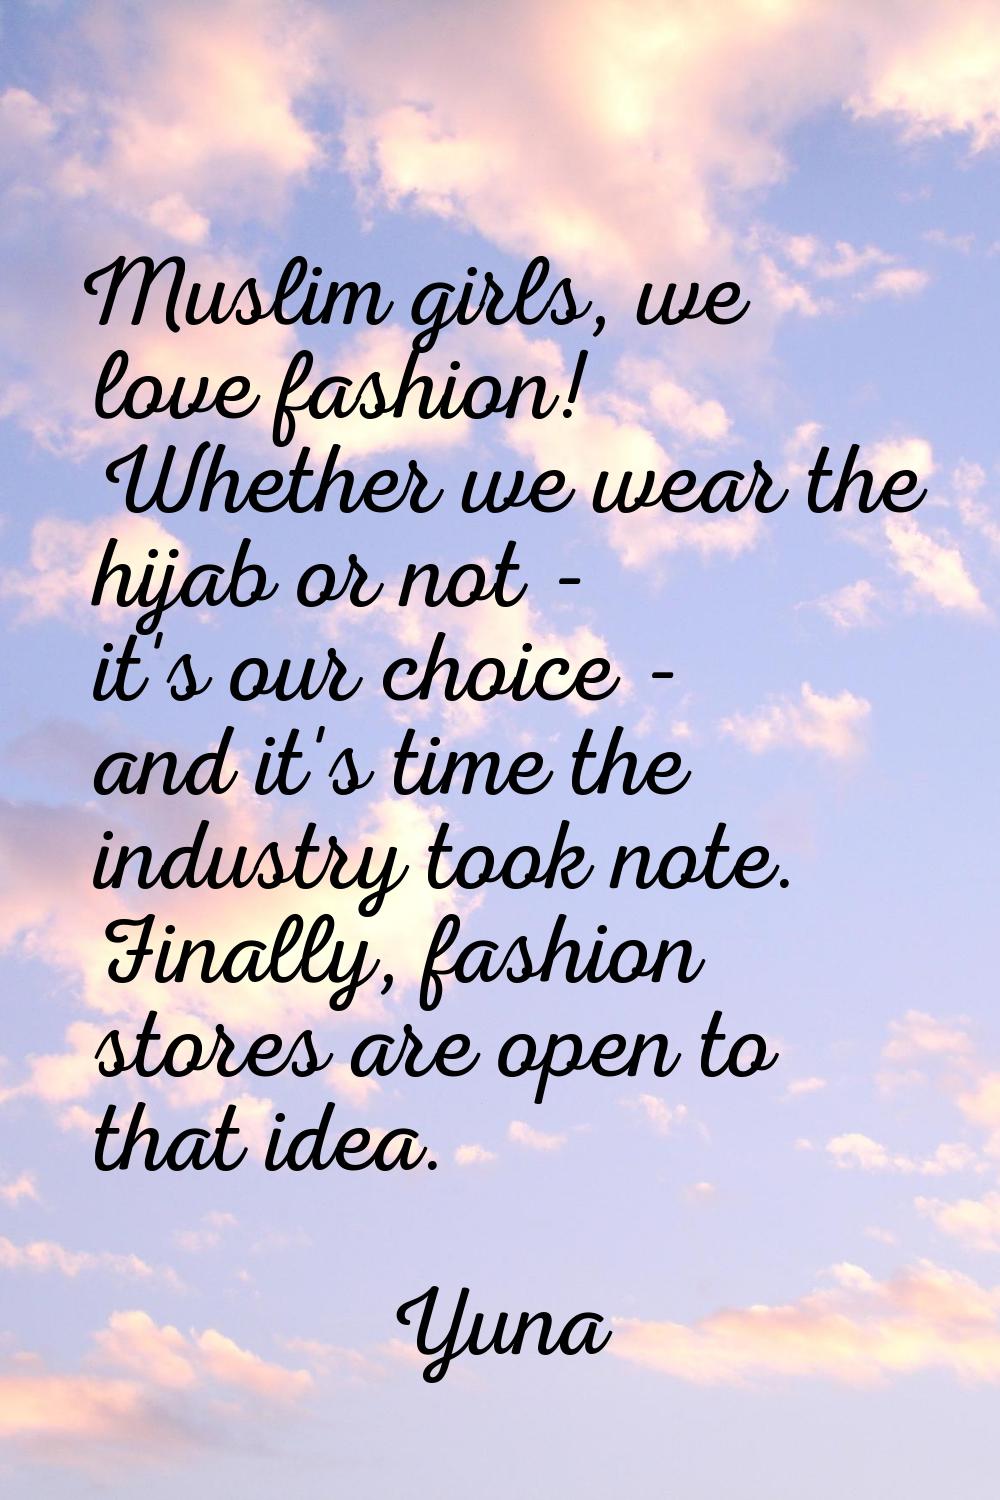 Muslim girls, we love fashion! Whether we wear the hijab or not - it's our choice - and it's time t